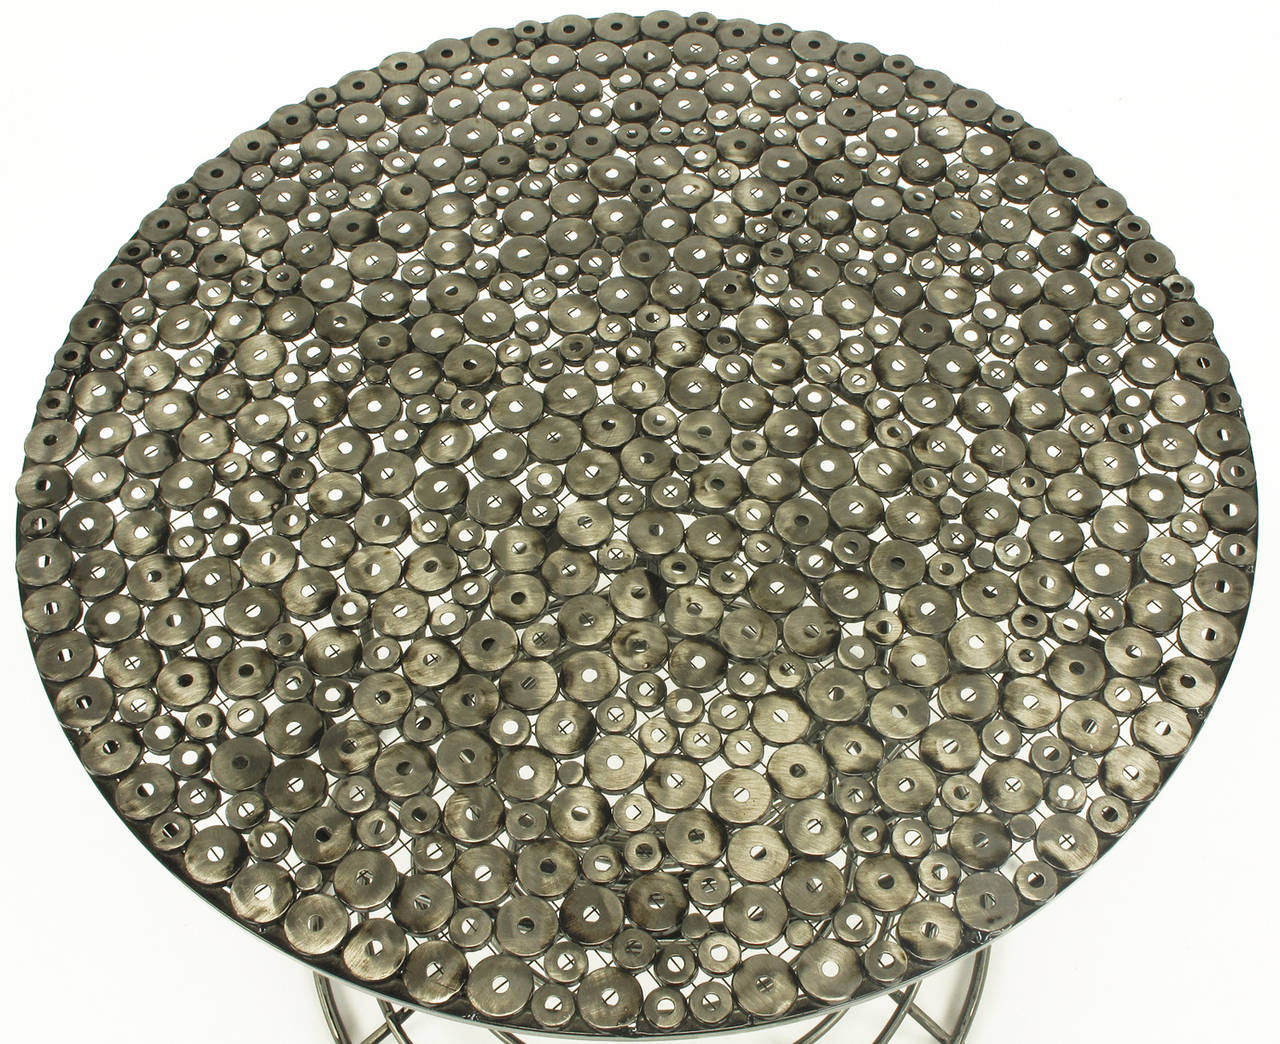 Welded Custom Studio Centre Table with Steel Rounds Top and Open Hourglass Base For Sale